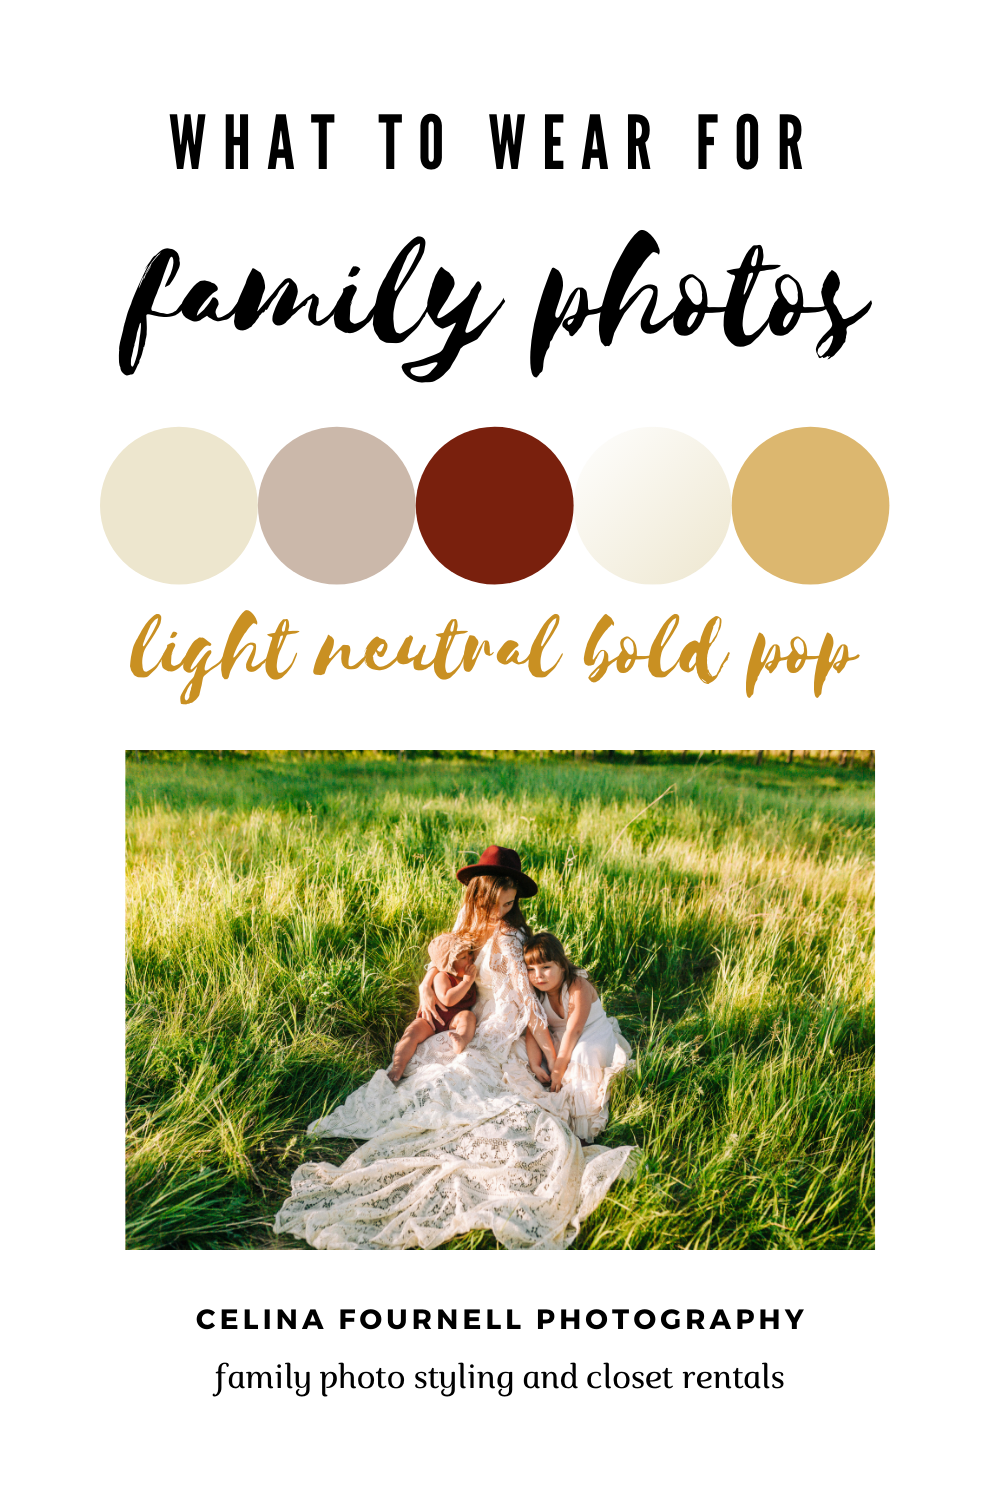 What to wear for family photos - light neutral bold pop